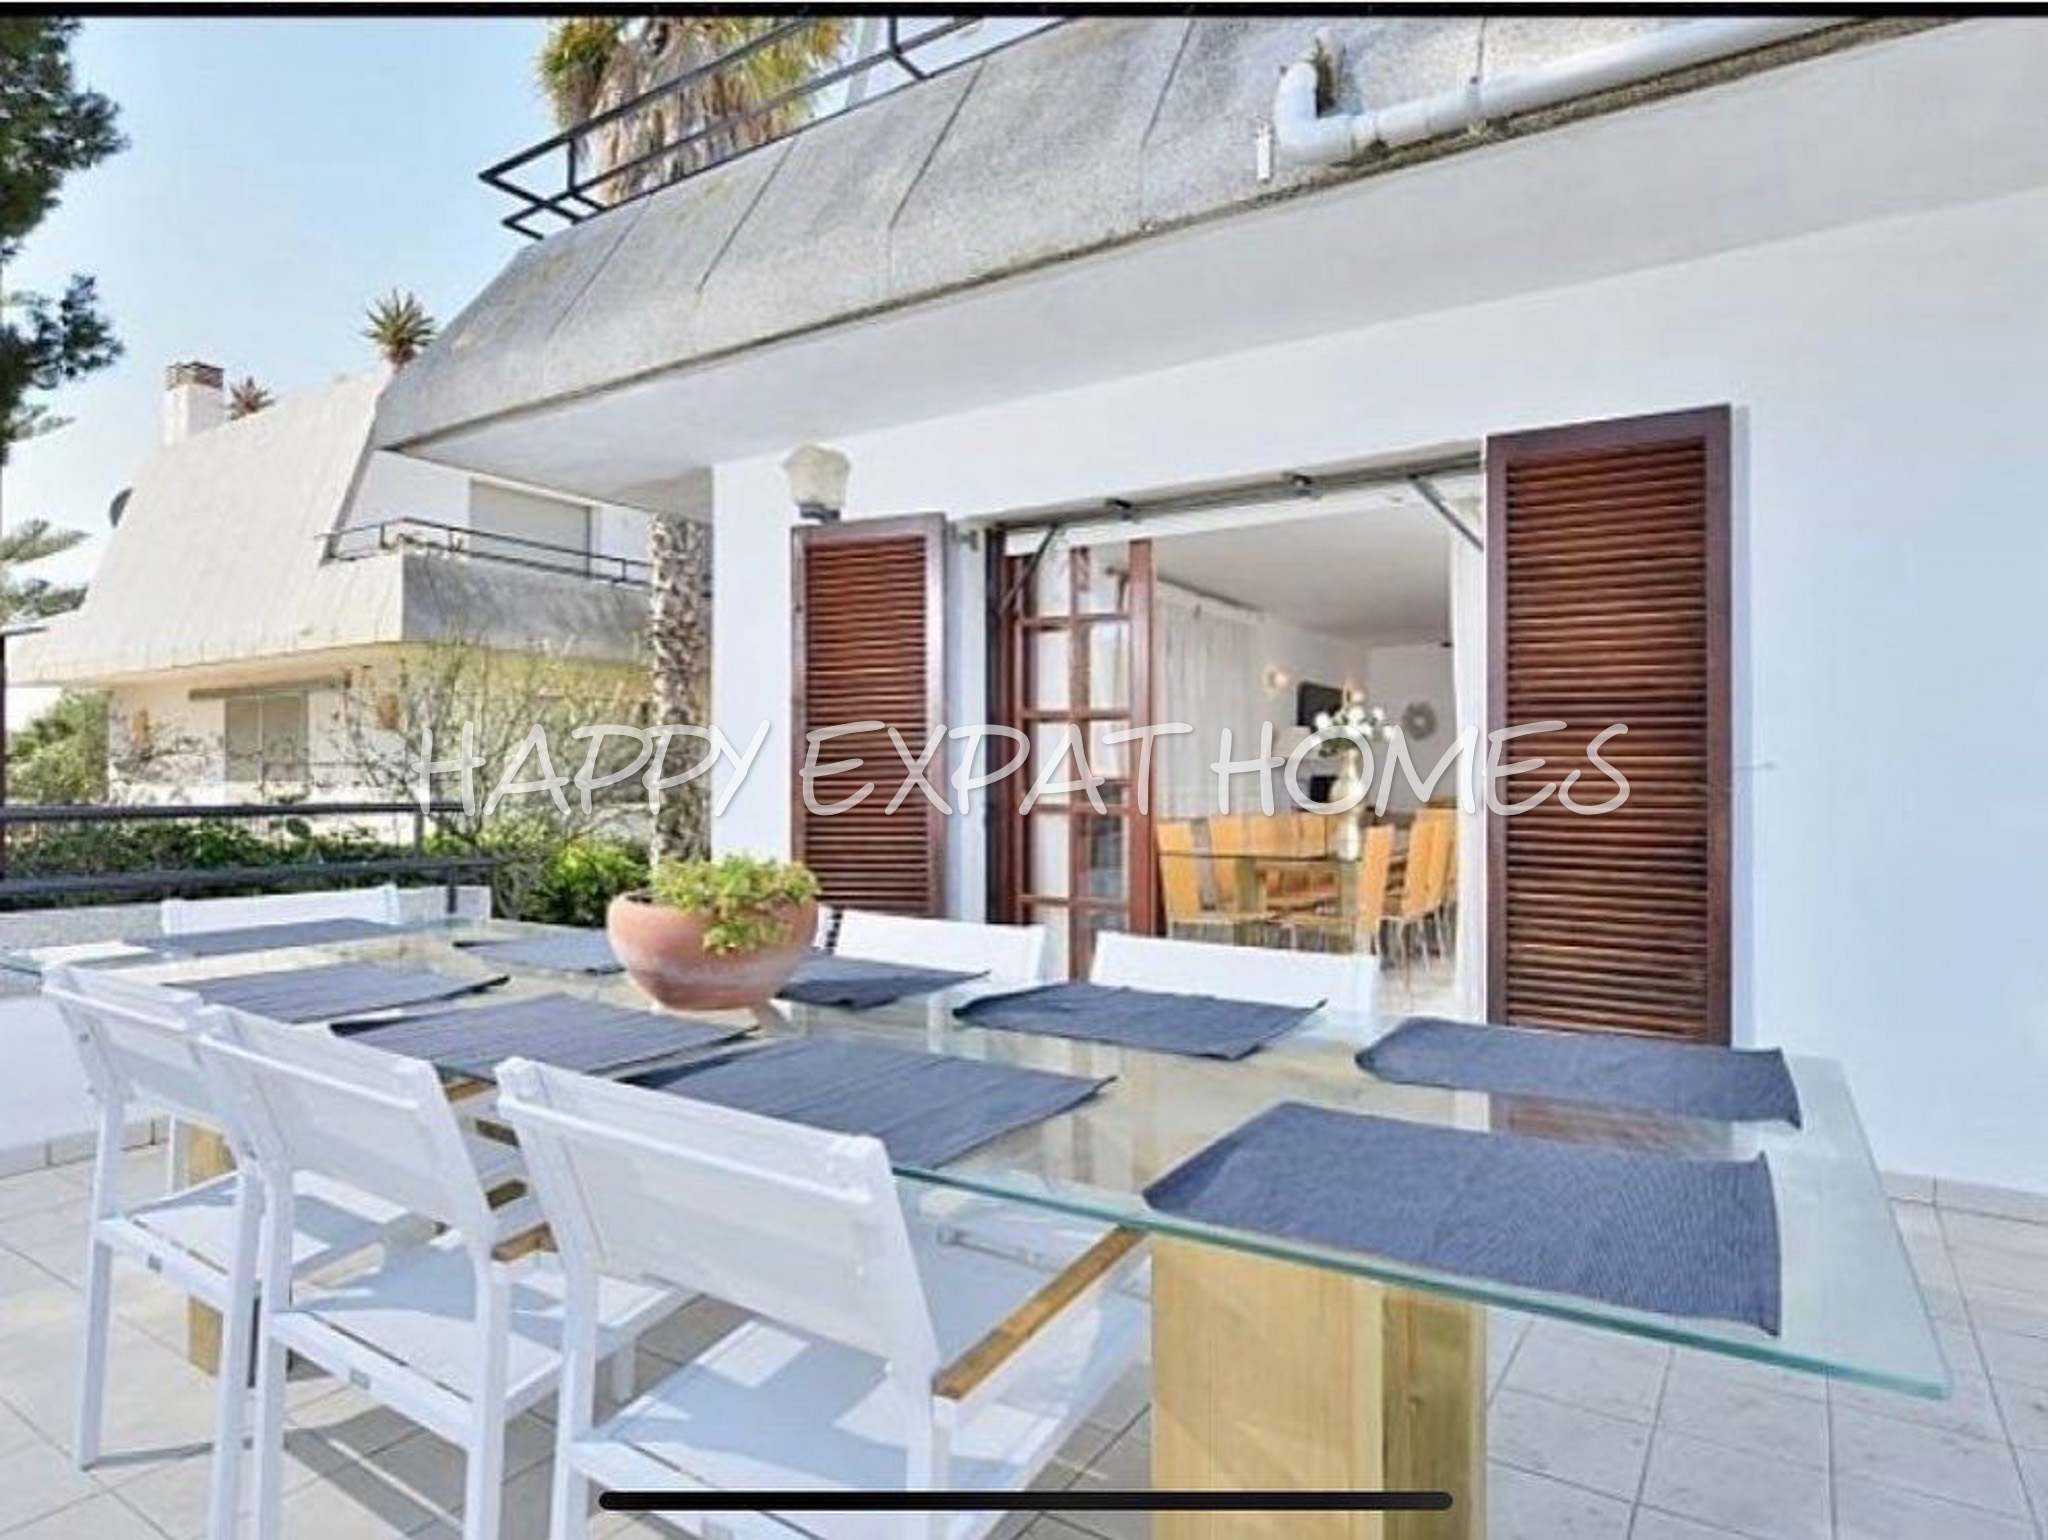 Big Villa for rent with private woods close to Sitges